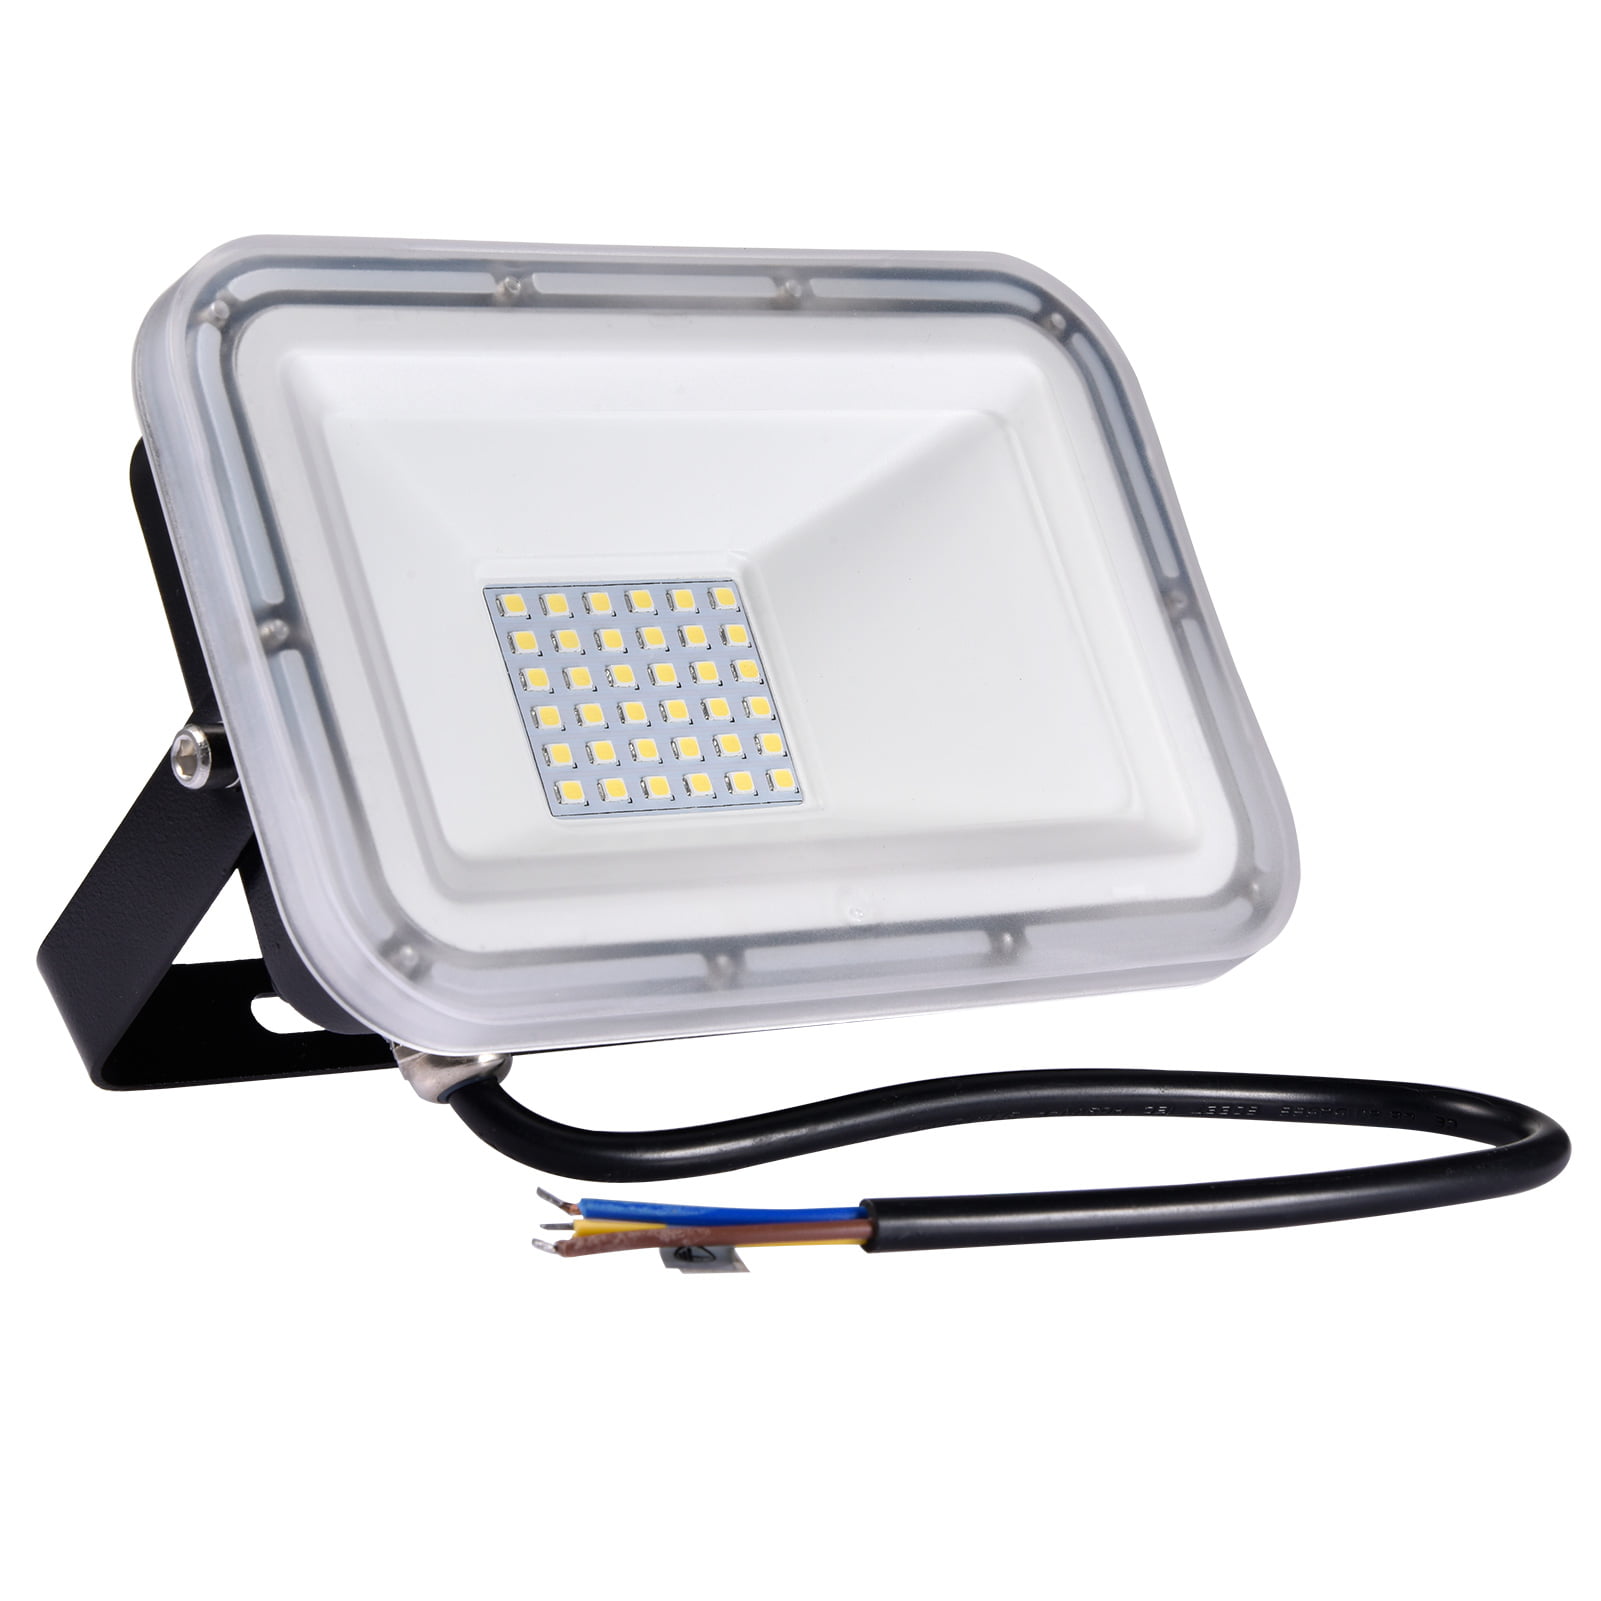 4 x 30W LED Flood Light Cool White Outdoor Security Garden Spot Lamp US Stock 